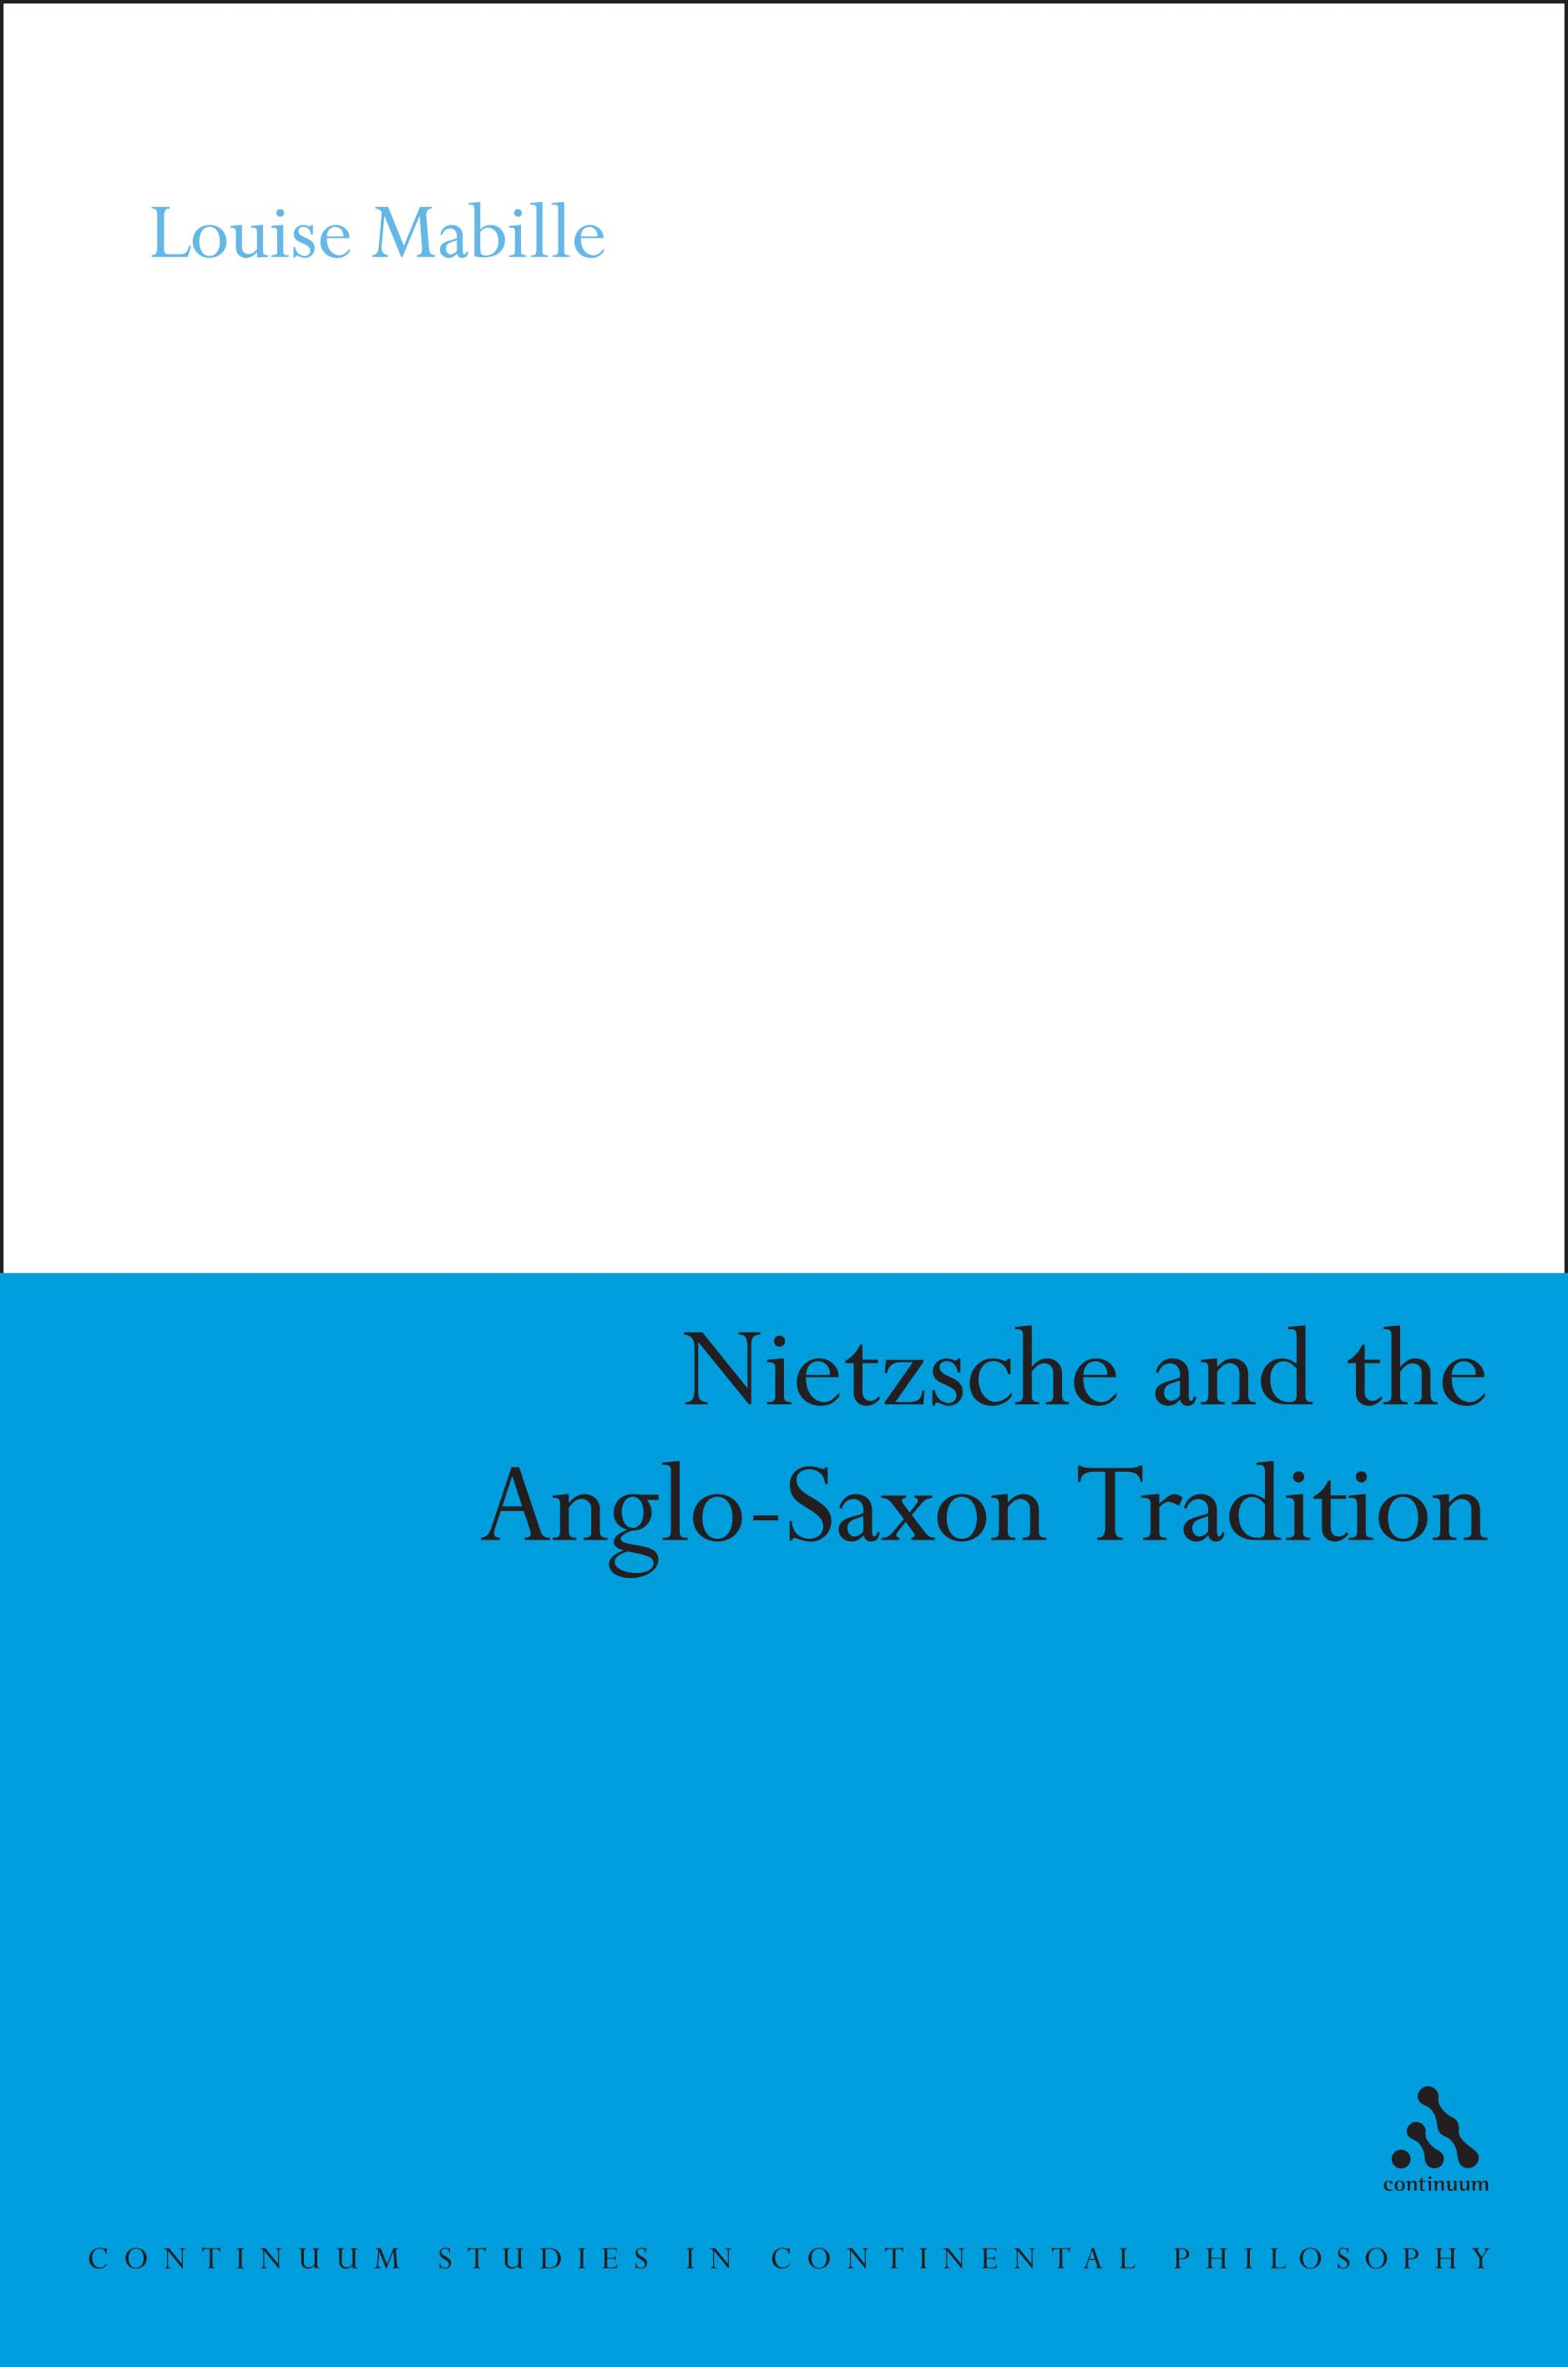 Nietzsche and the Anglo-Saxon Tradition - 25-49.99